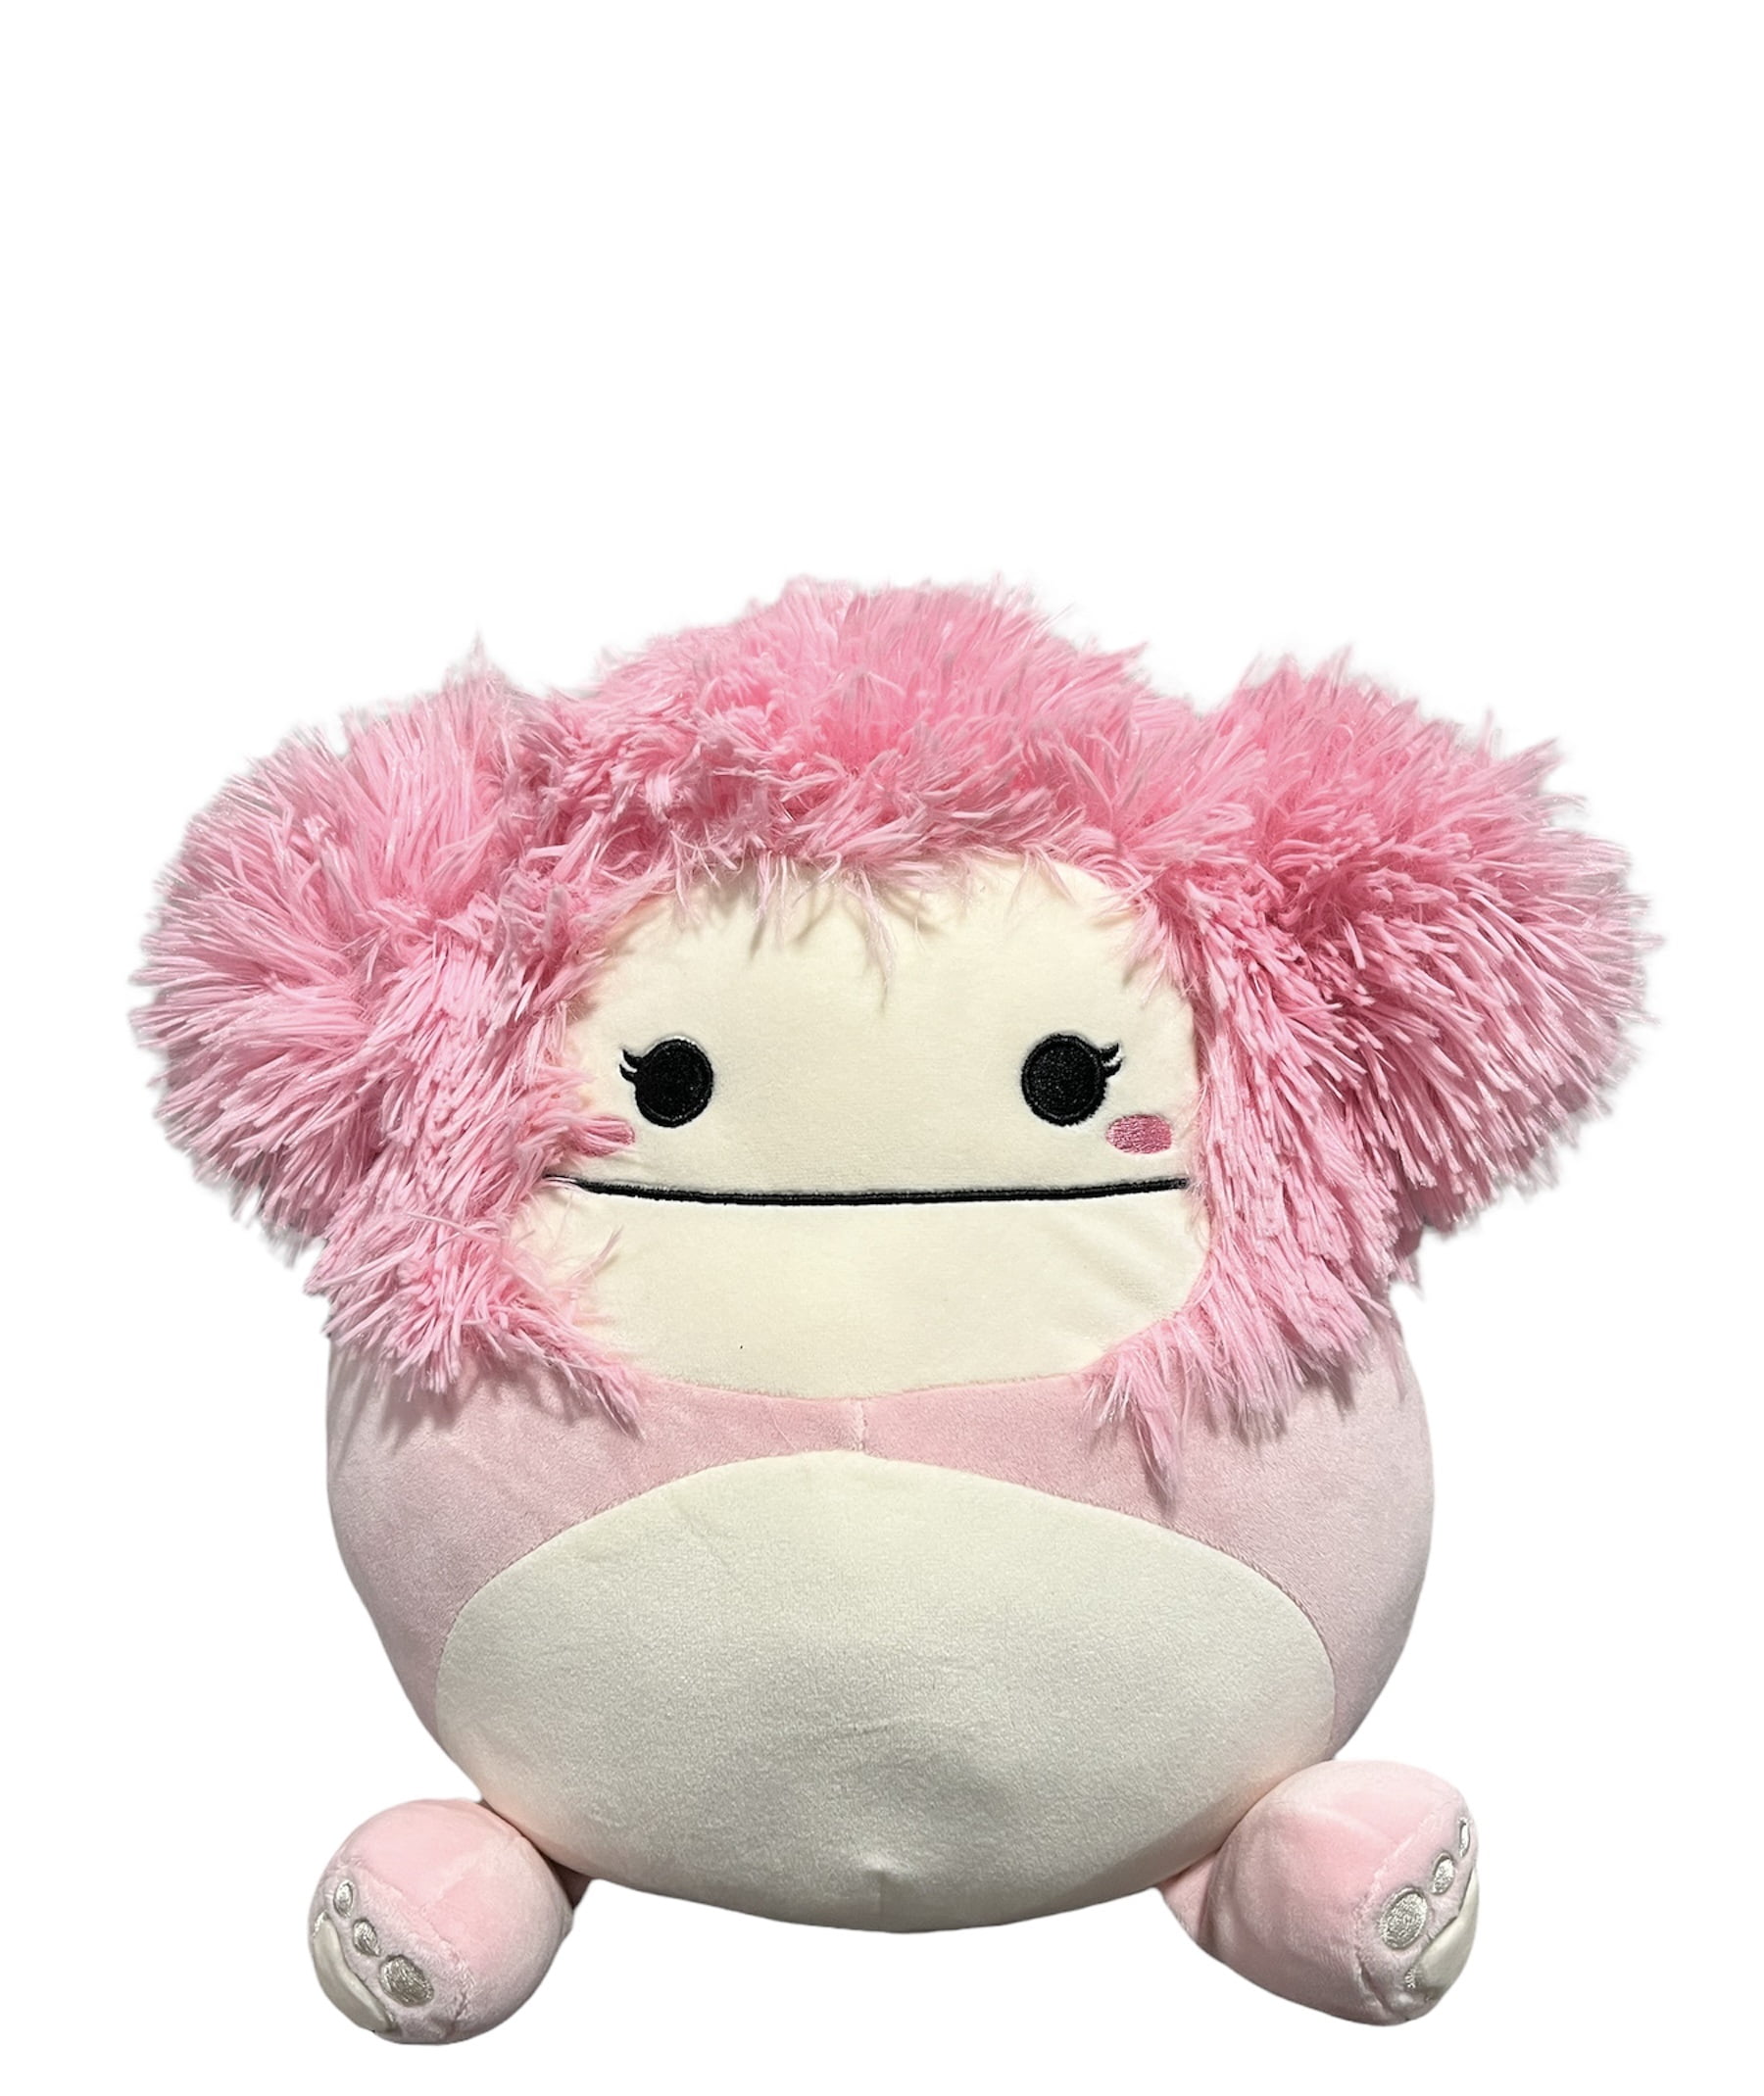 Details about   Squishmallows 12" Brina the Pink Bigfoot KellyToy Cute Plush NWT 2021 